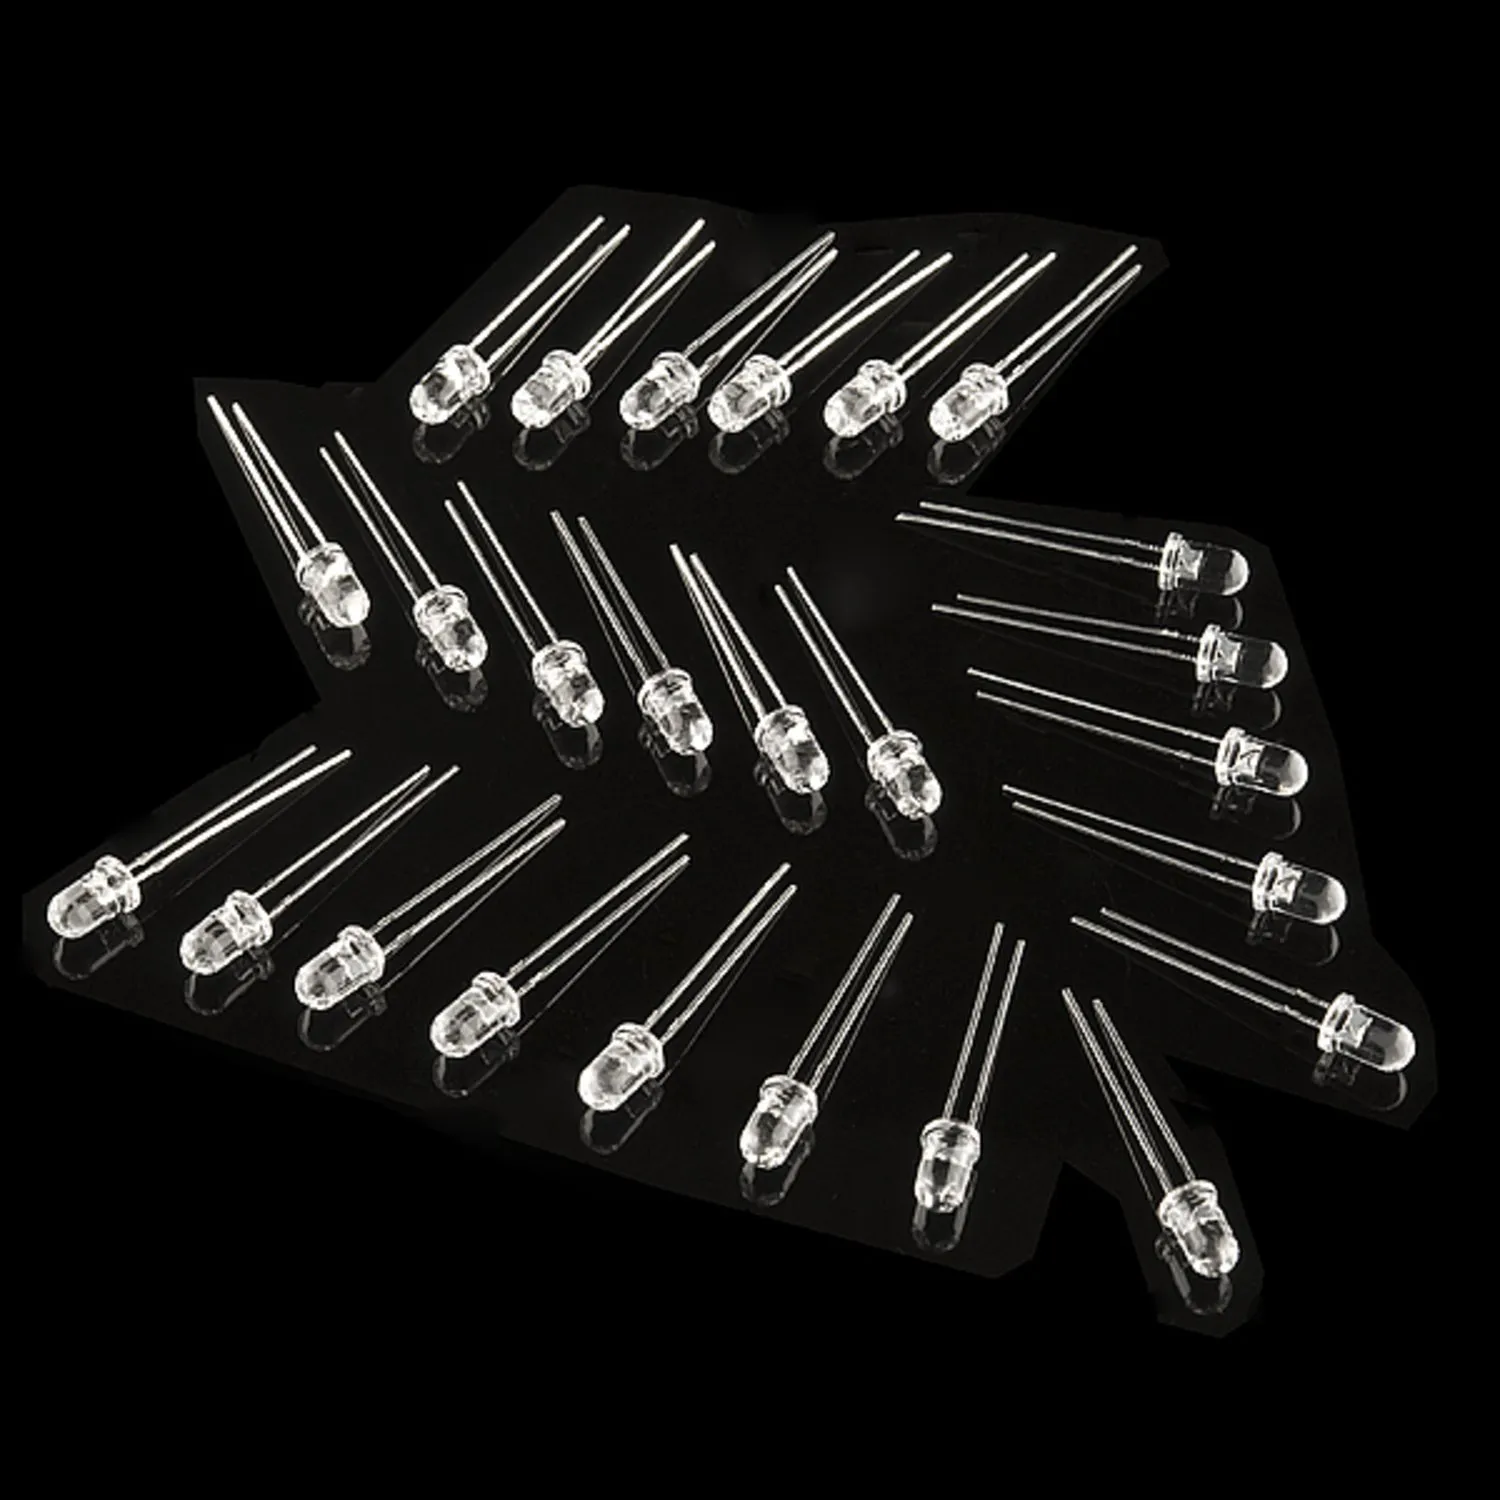 Photo of LED - Super Bright Red (25 pack)